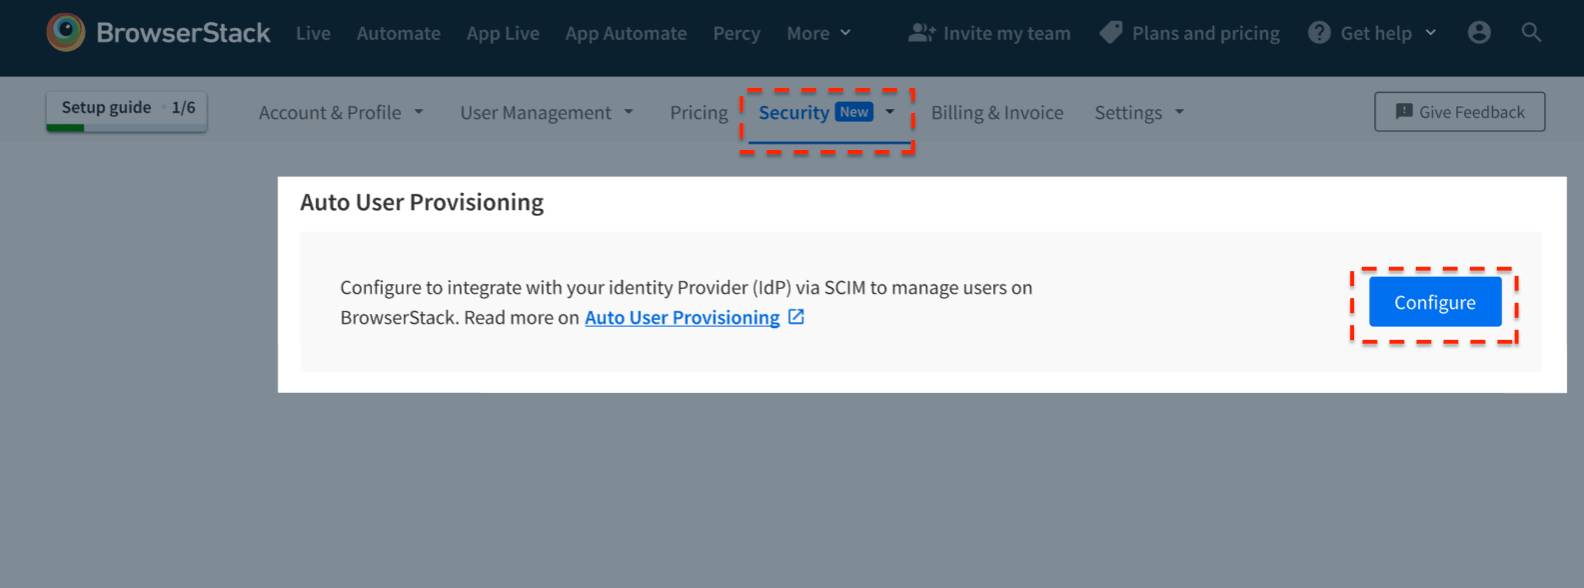 Click on configure button under Auto User Provisioning